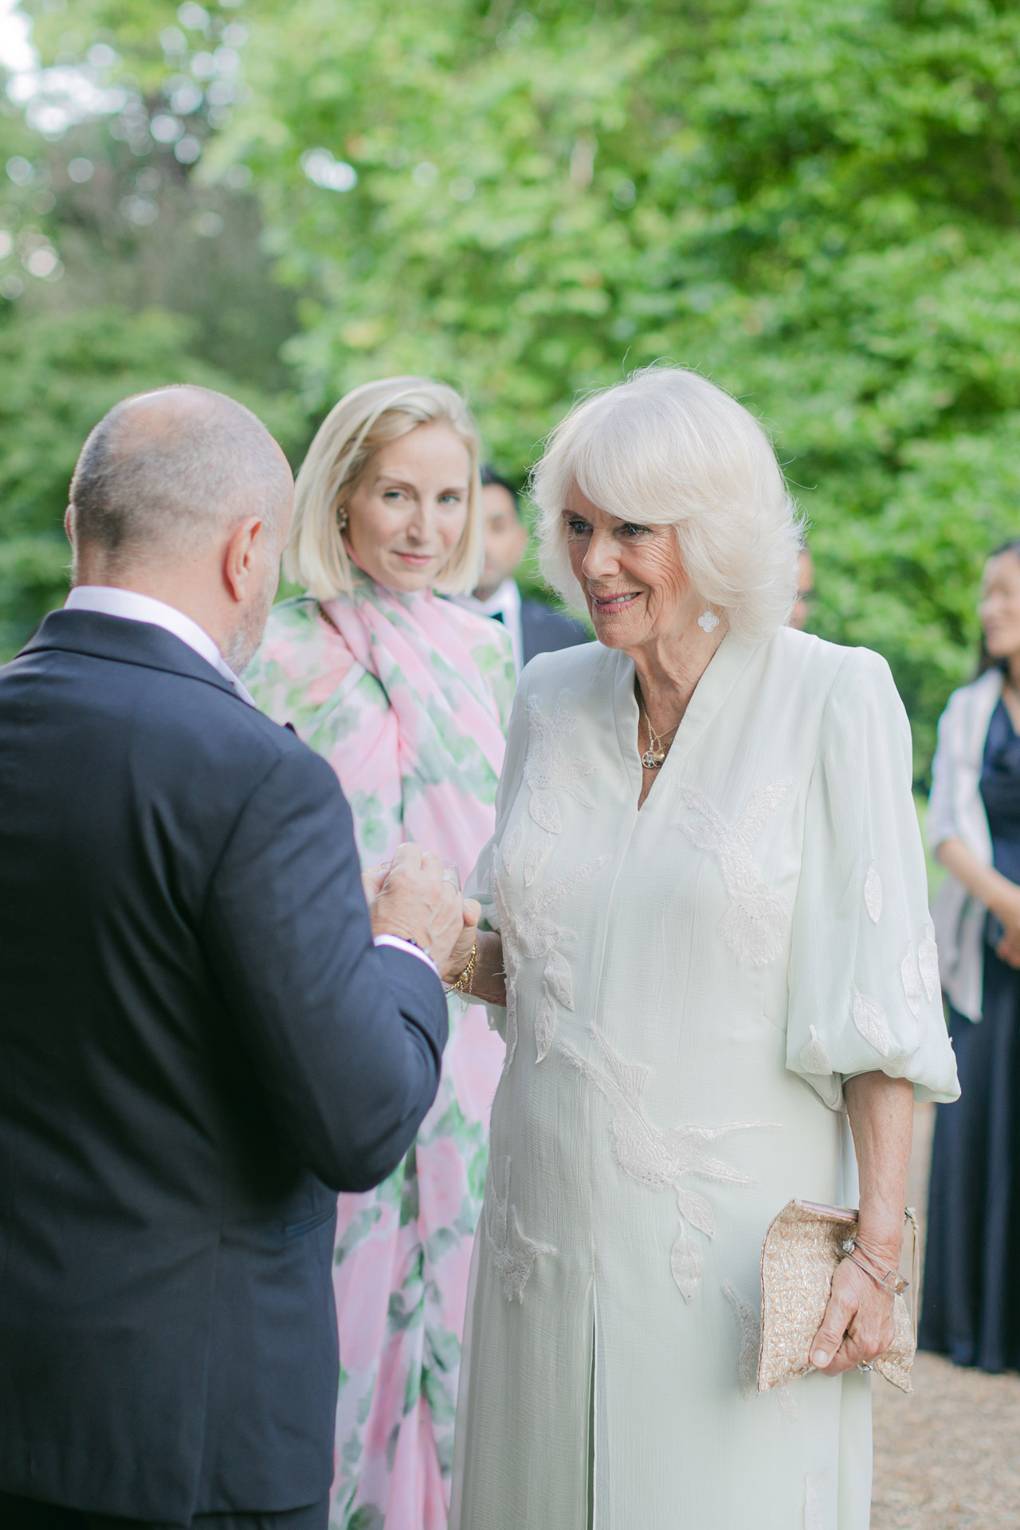 The Prince of Wales and Duchess of Cornwall host ‘A Starry Night in the ...